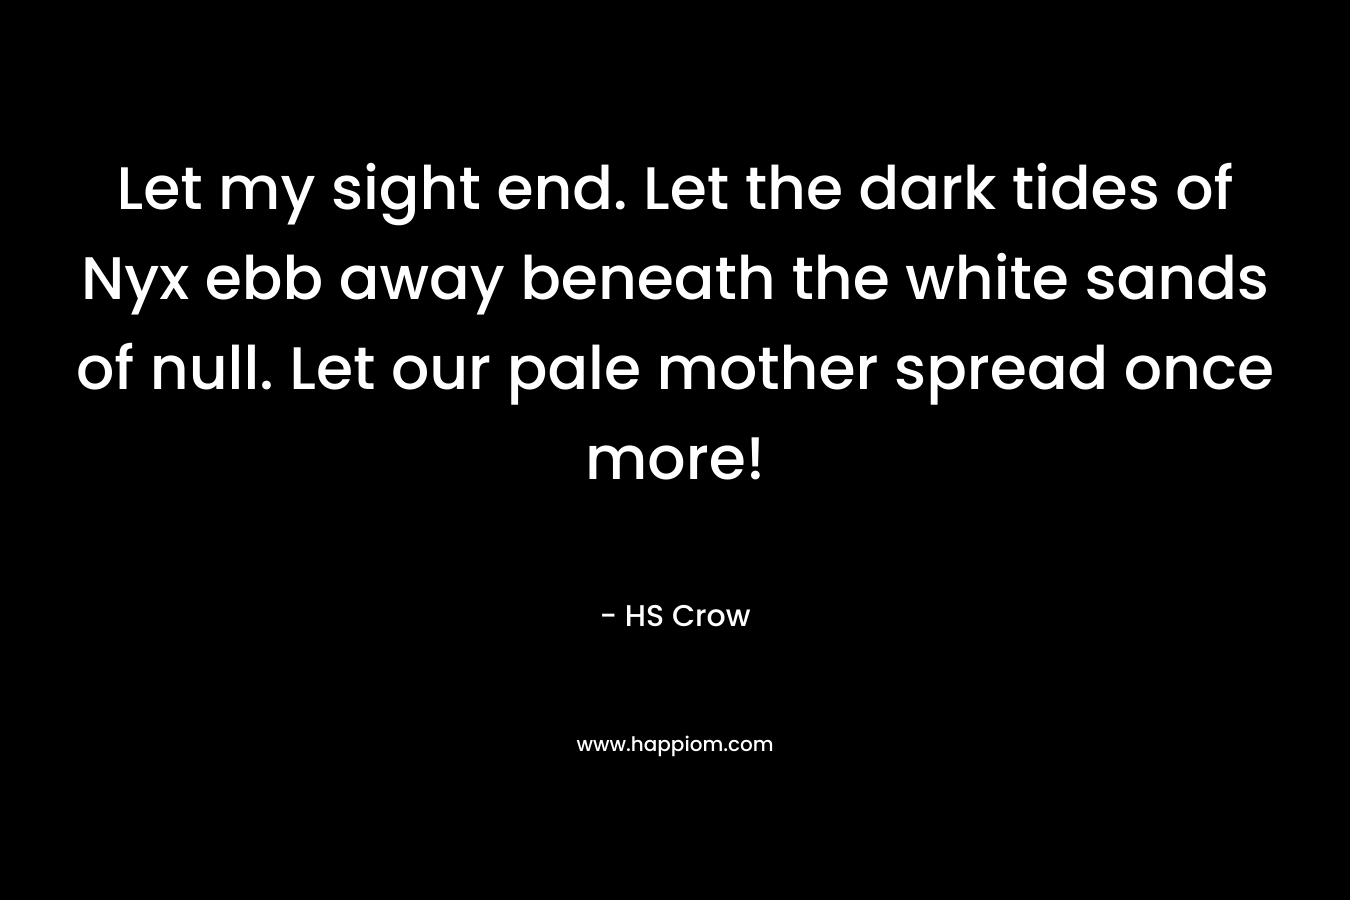 Let my sight end. Let the dark tides of Nyx ebb away beneath the white sands of null. Let our pale mother spread once more! – HS Crow